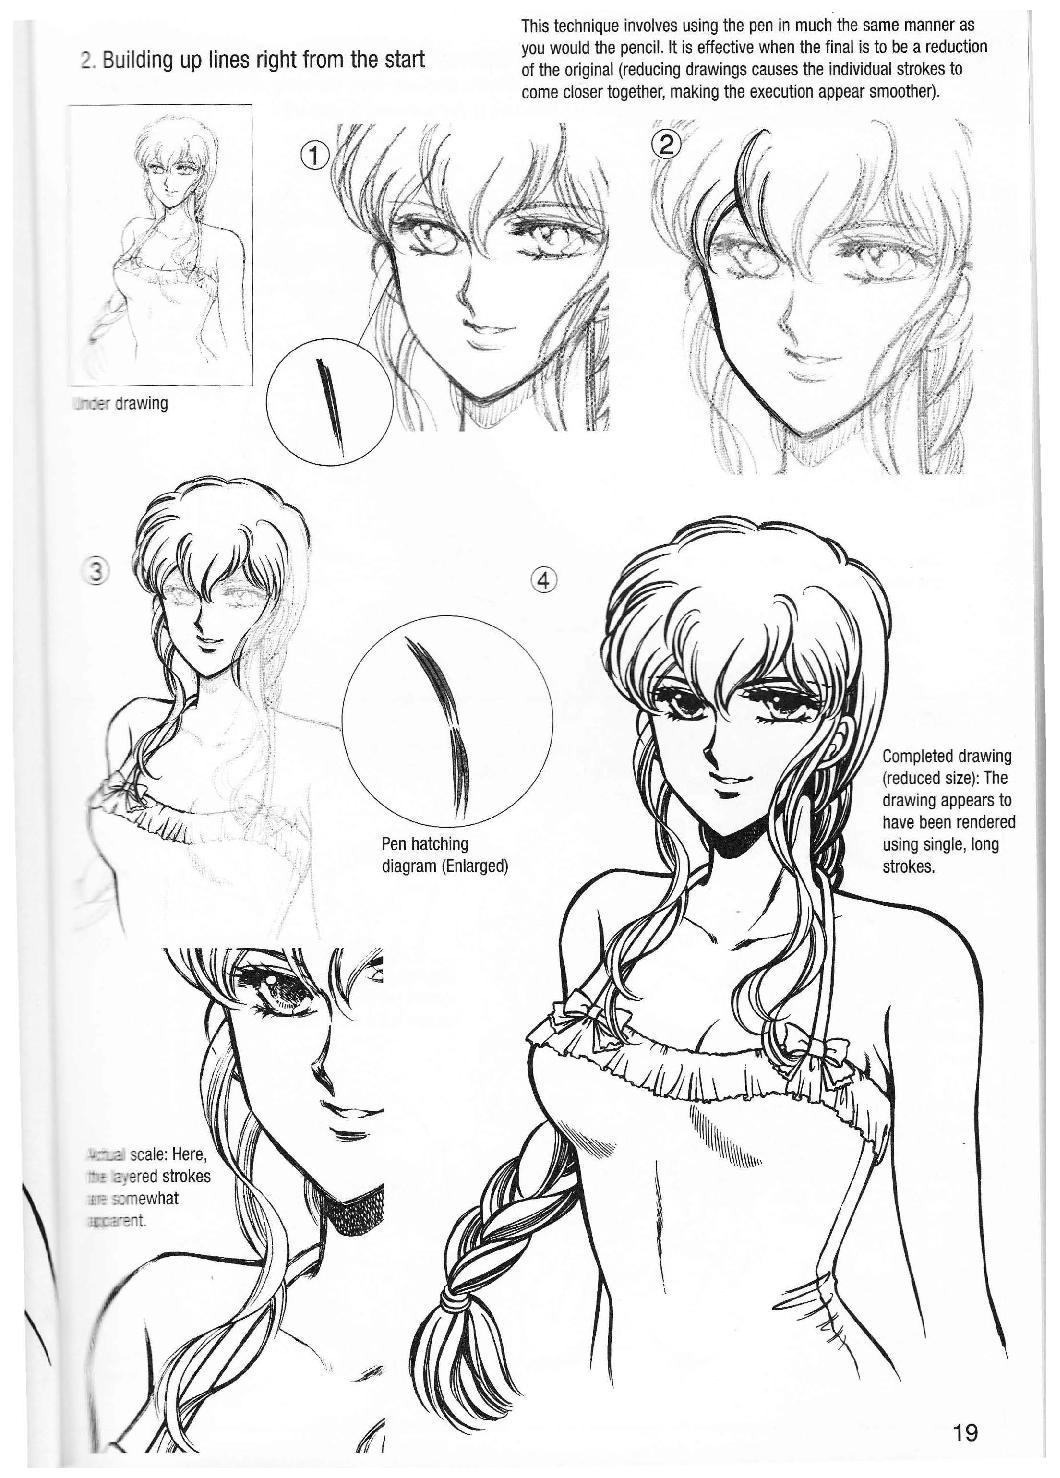 More How to Draw Manga Vol. 2 - Penning Characters 20